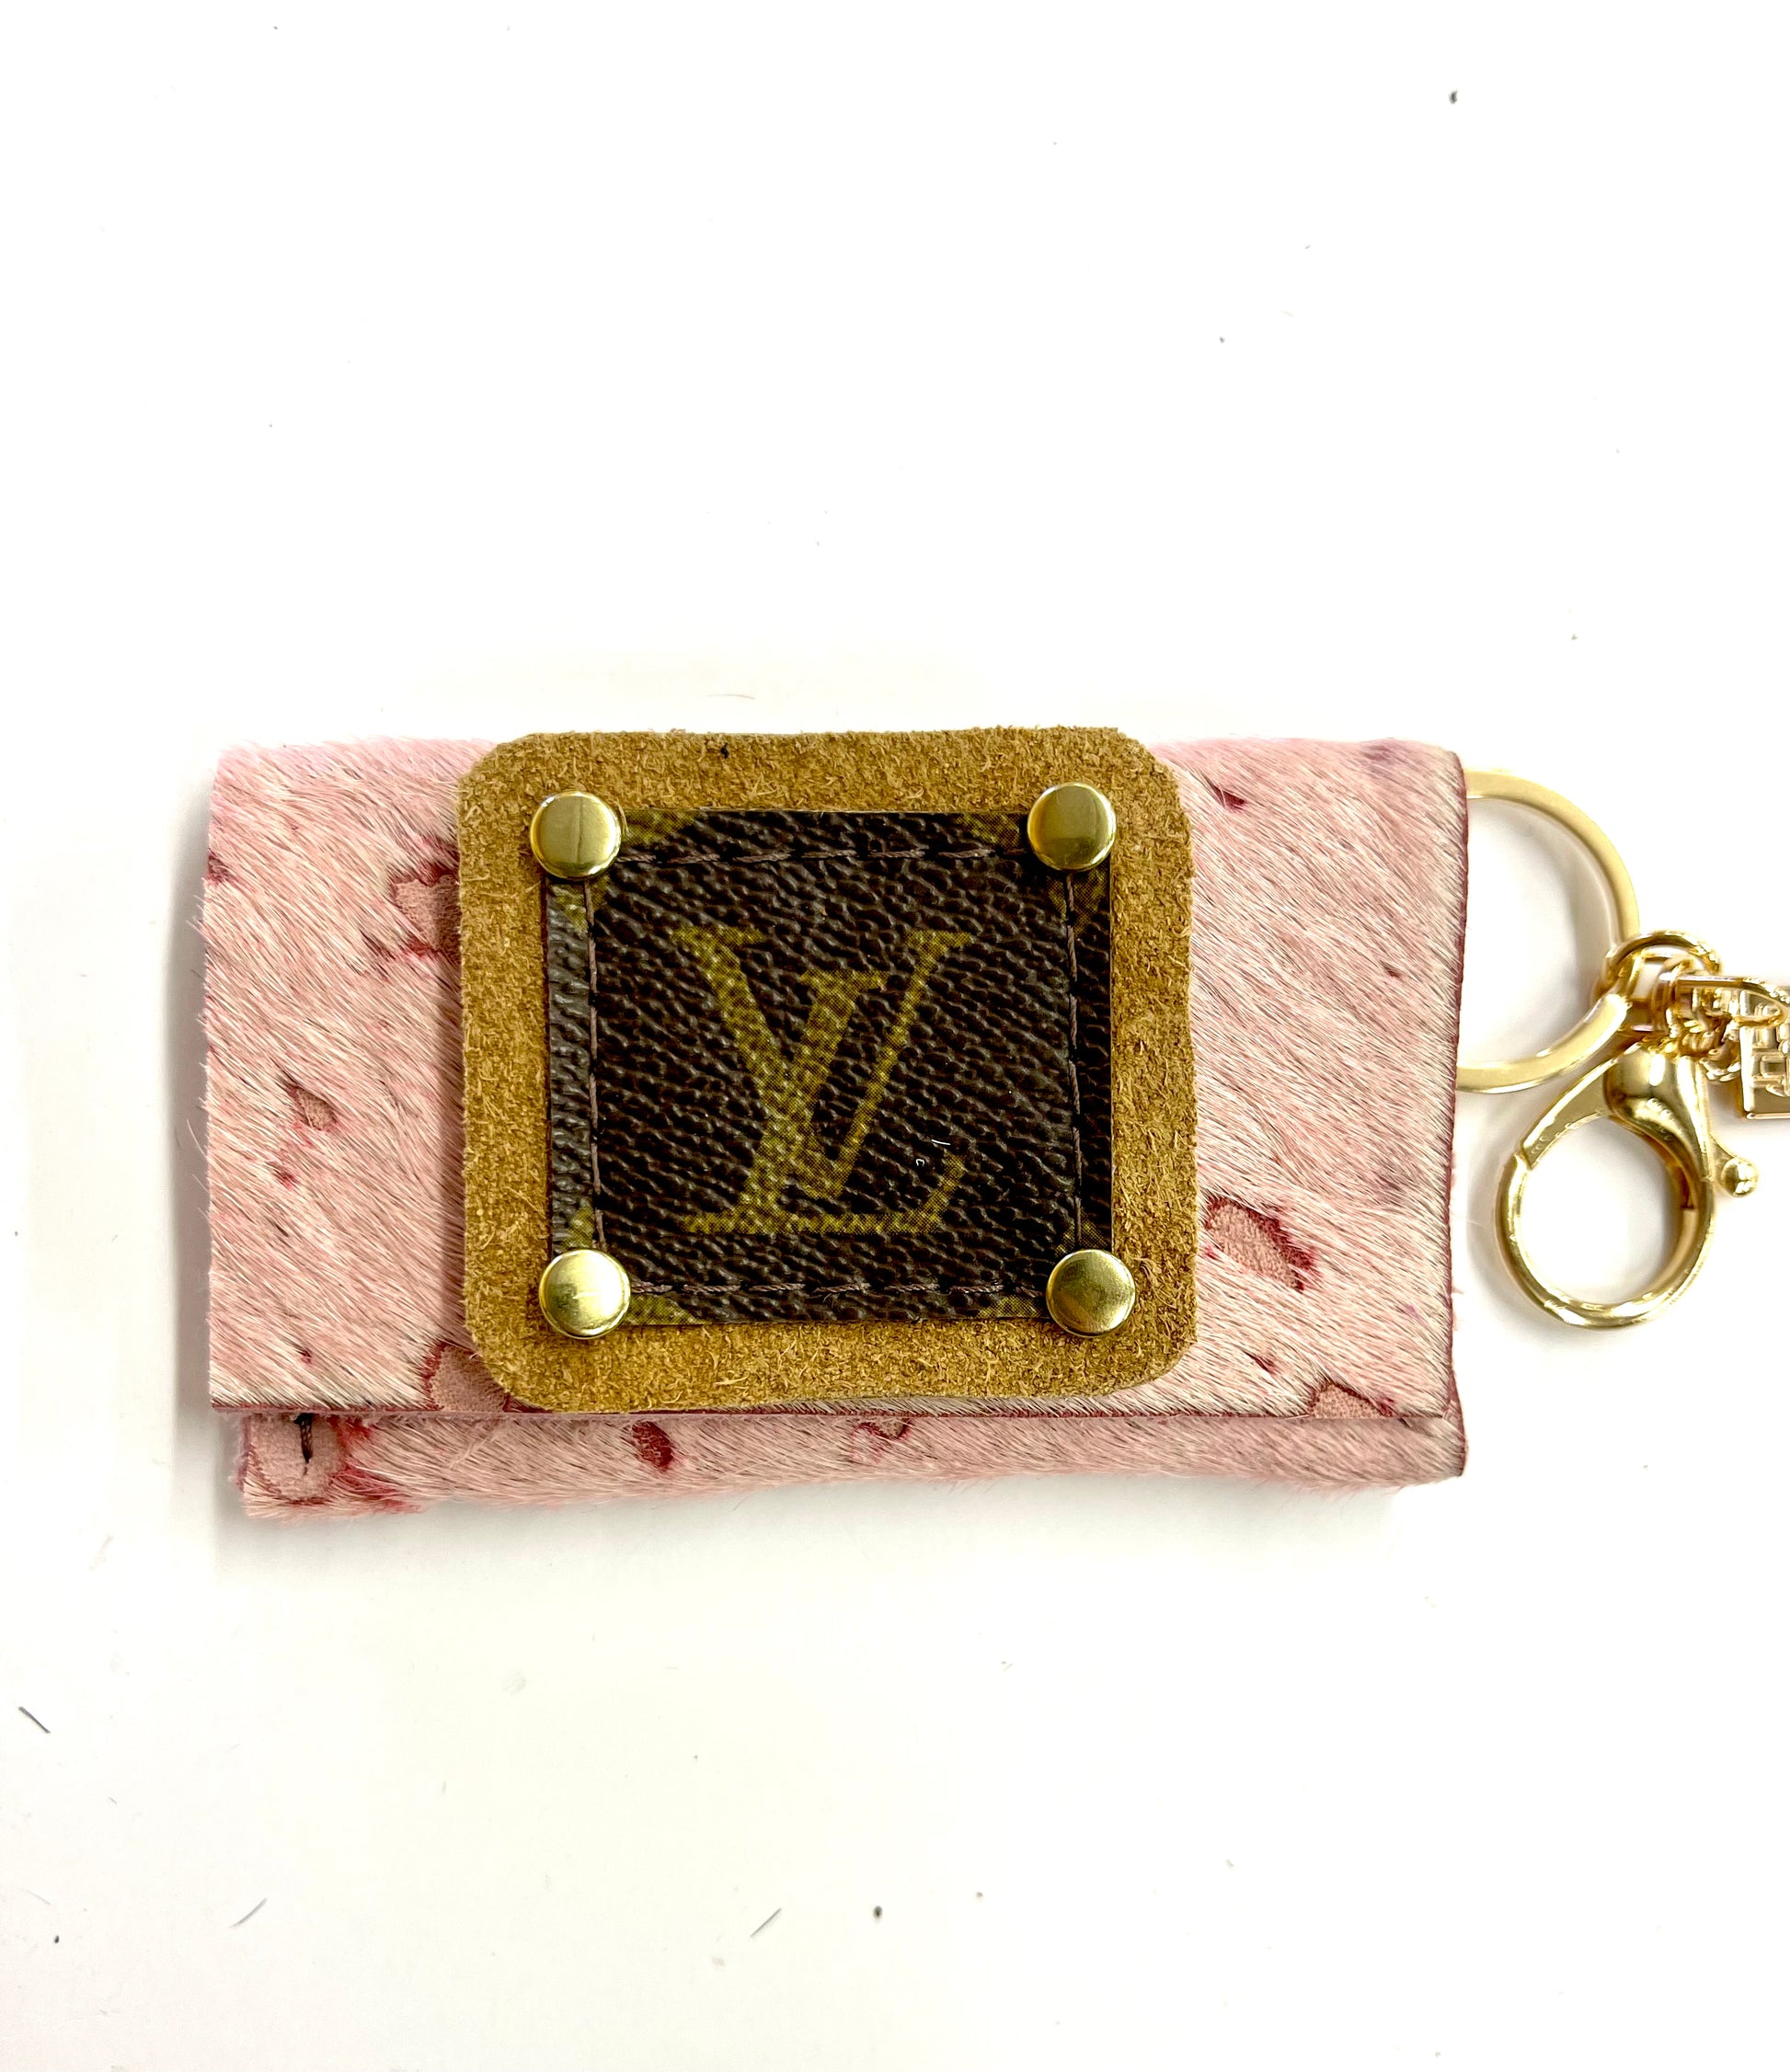 Cardholder multiple options with LV patch with border in Camel